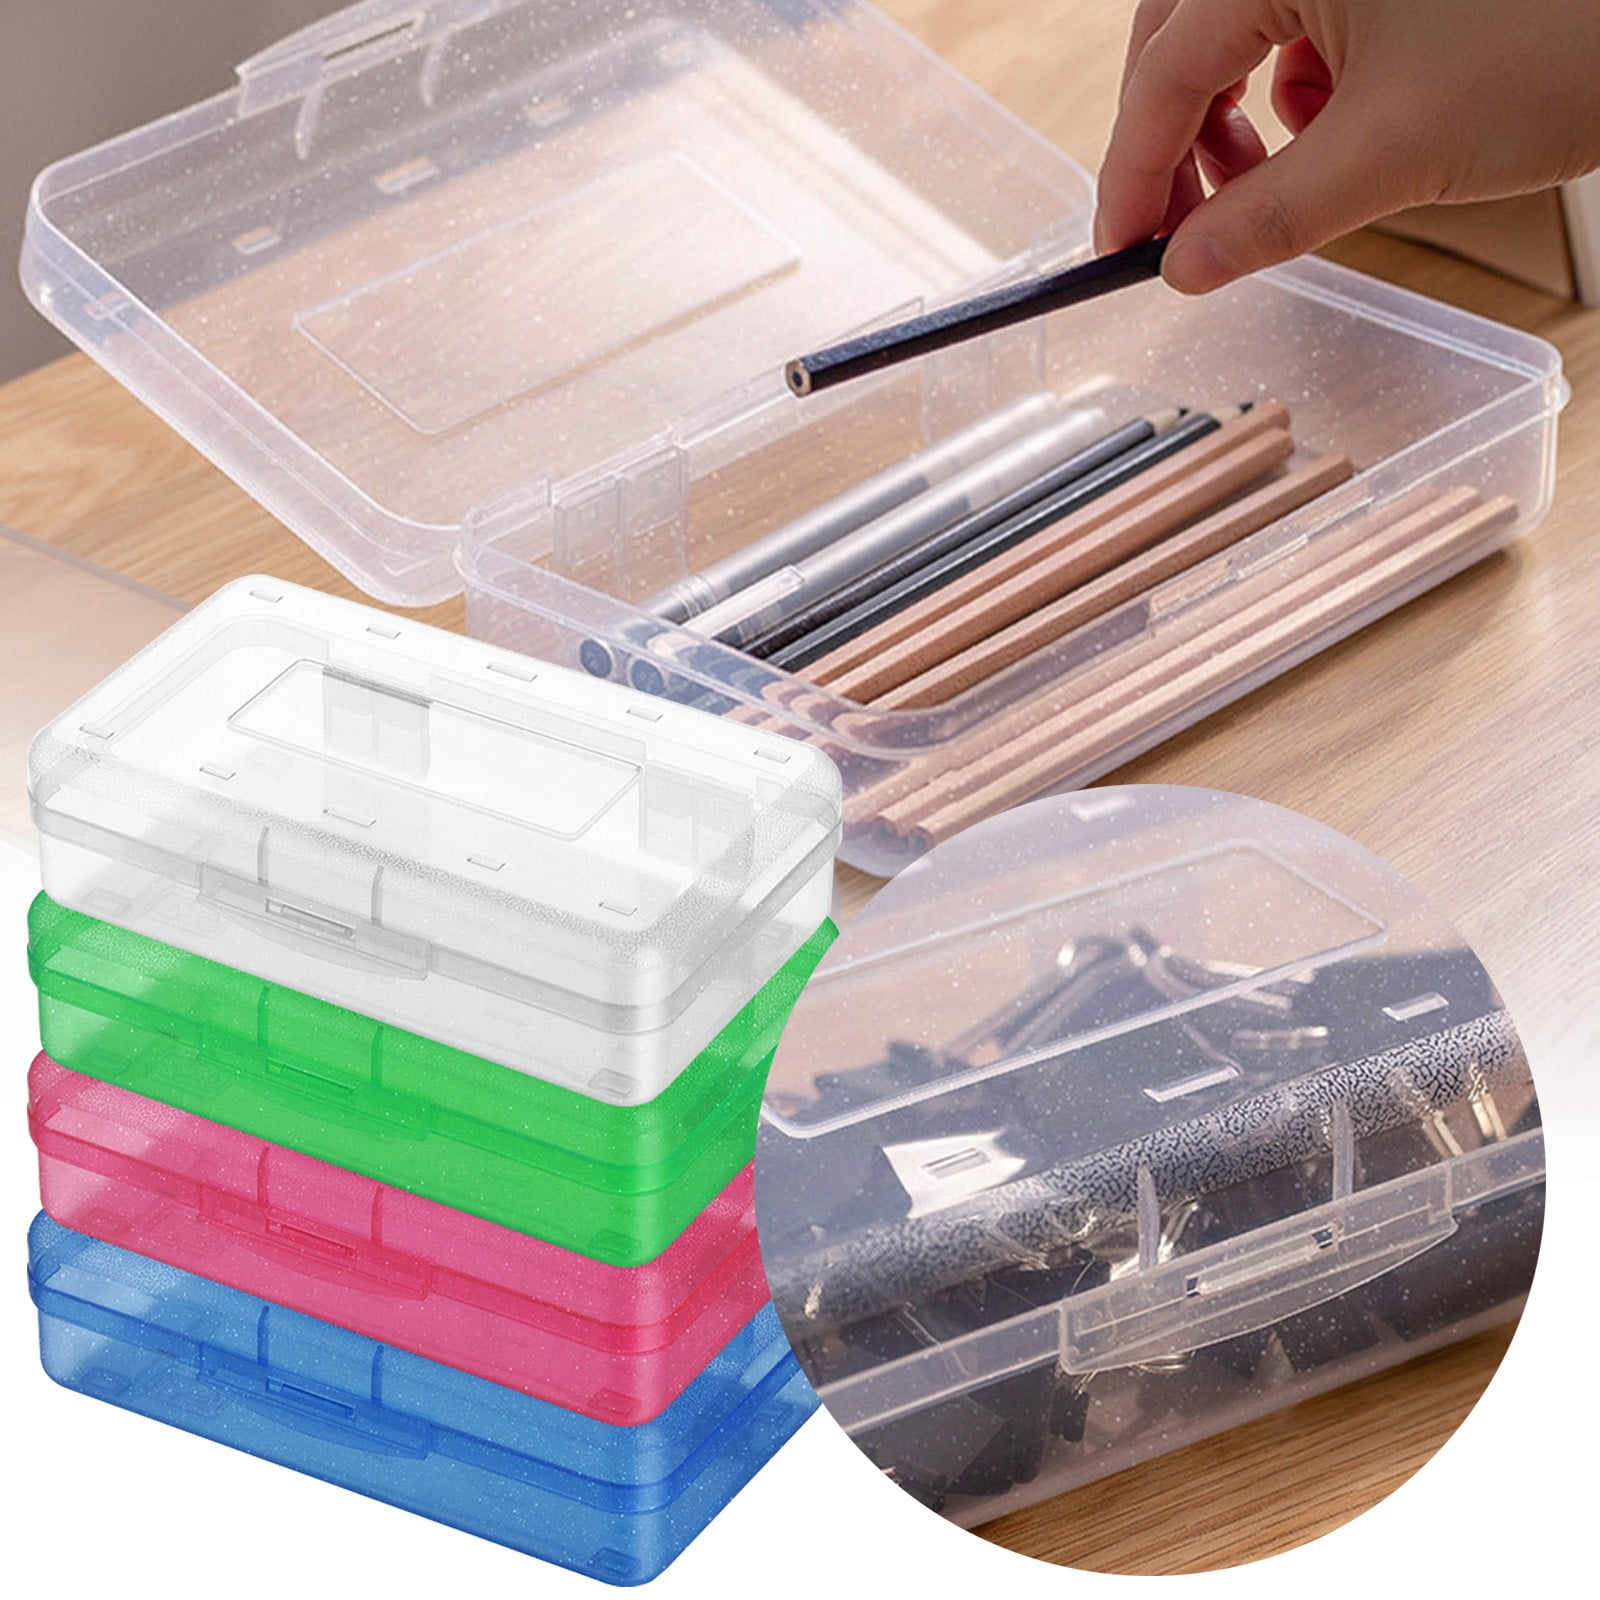 Wholesale Transparent Frosted Plastic Small Plastic Pencil Case  Multifunctional Storage Box For Pens And Stationery Supplies In Pink,  Green, White, And Blue Ideal For School And Office Use JY0634 From  Dreambeauty_qh, $0.02